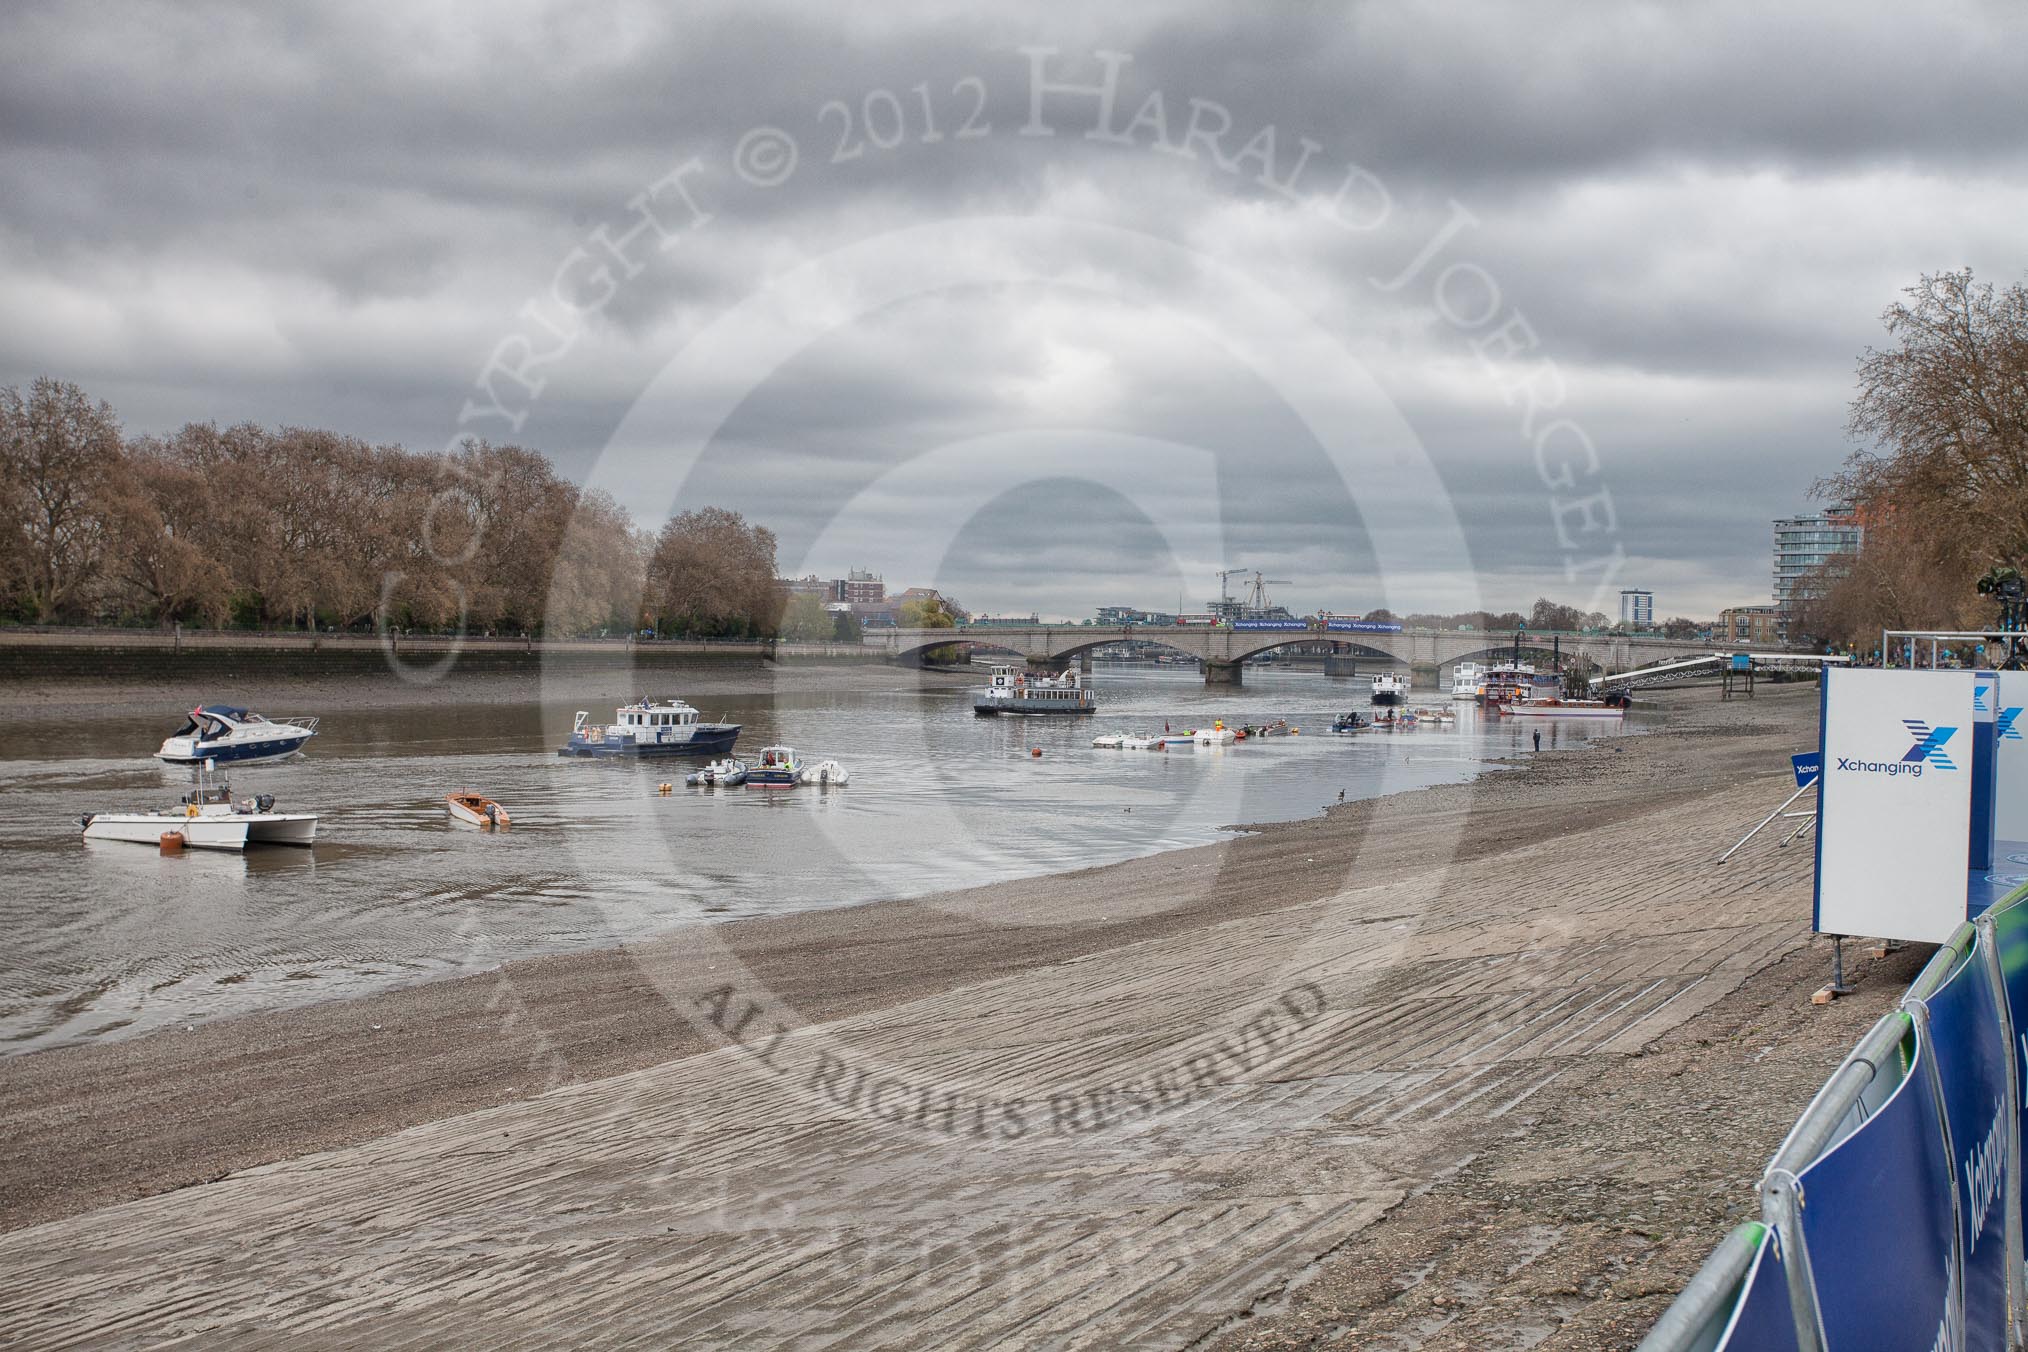 The Boat Race 2012: Setting the scene for the 2012 Boat Race: The River Thames, seen from Putney Embankment, with Putney Bridge on the right, at low tide, in the morning of Boat Race day..




on 07 April 2012 at 11:22, image #17